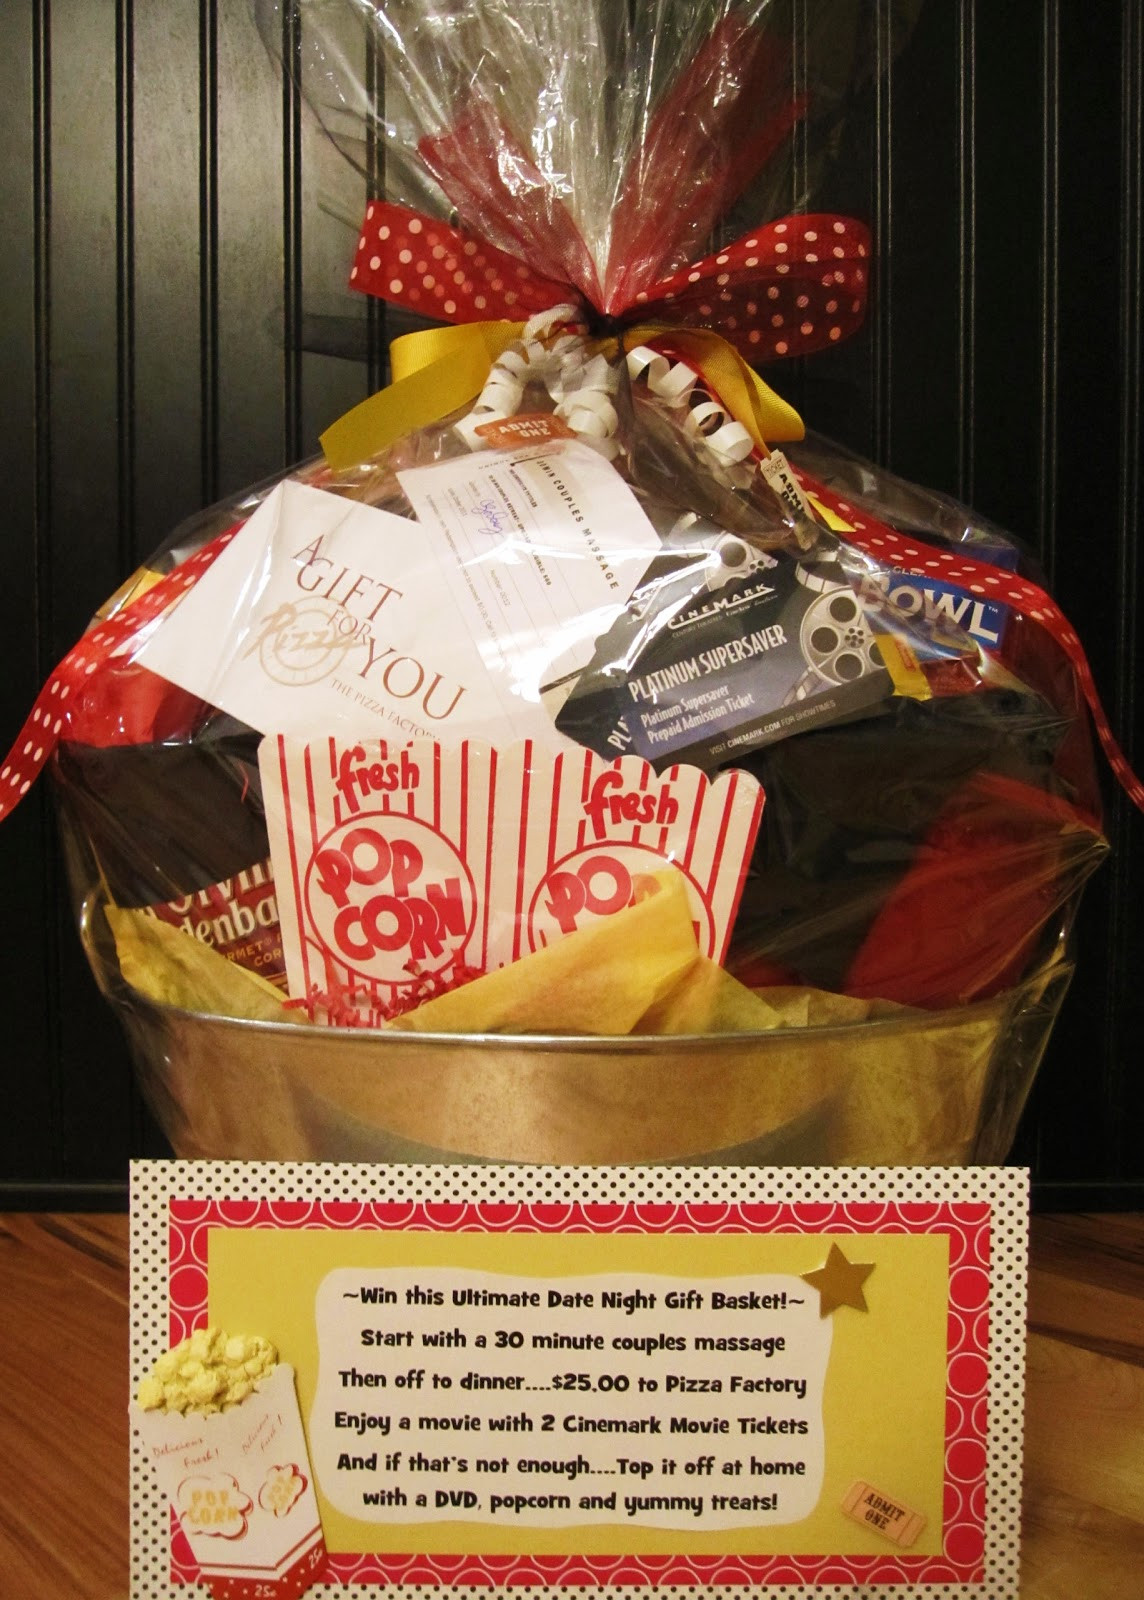 Date Night Gift Basket Ideas
 My Family Dentist Dr Ed Faddis DDS "ULTIMATE DATE